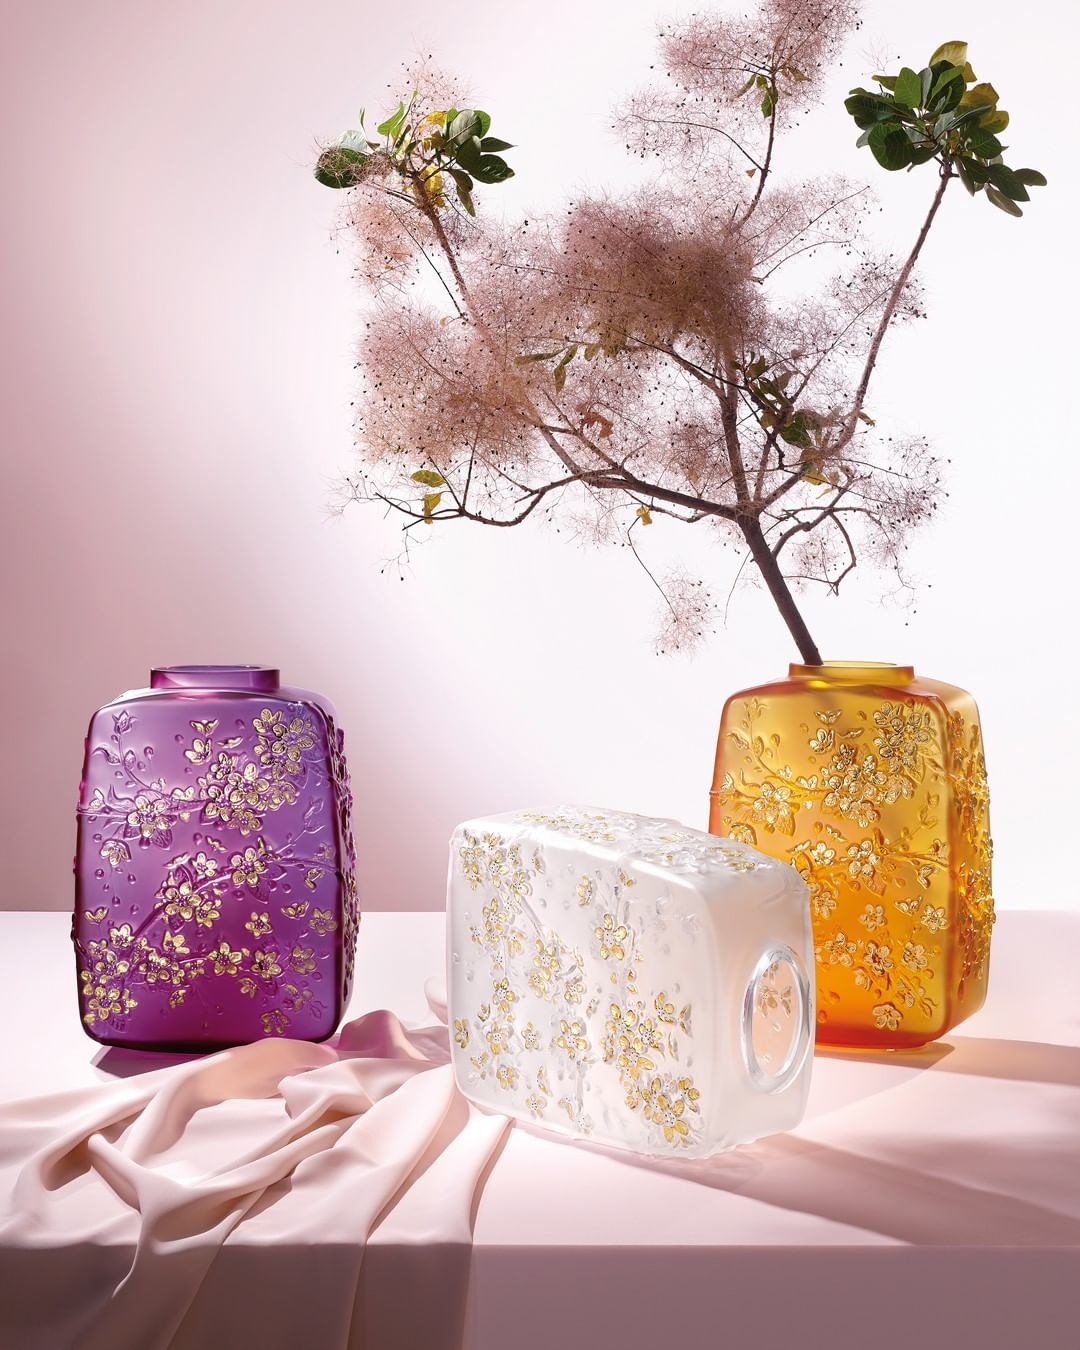 LALIQUE - The world-famous and wondrous blossoming of Japanese cherry trees inspired the design of the Fleurs de Cerisier vases. True masterpieces of interior decoration!
.
.
.
.
.
#botanica #laliqueb...